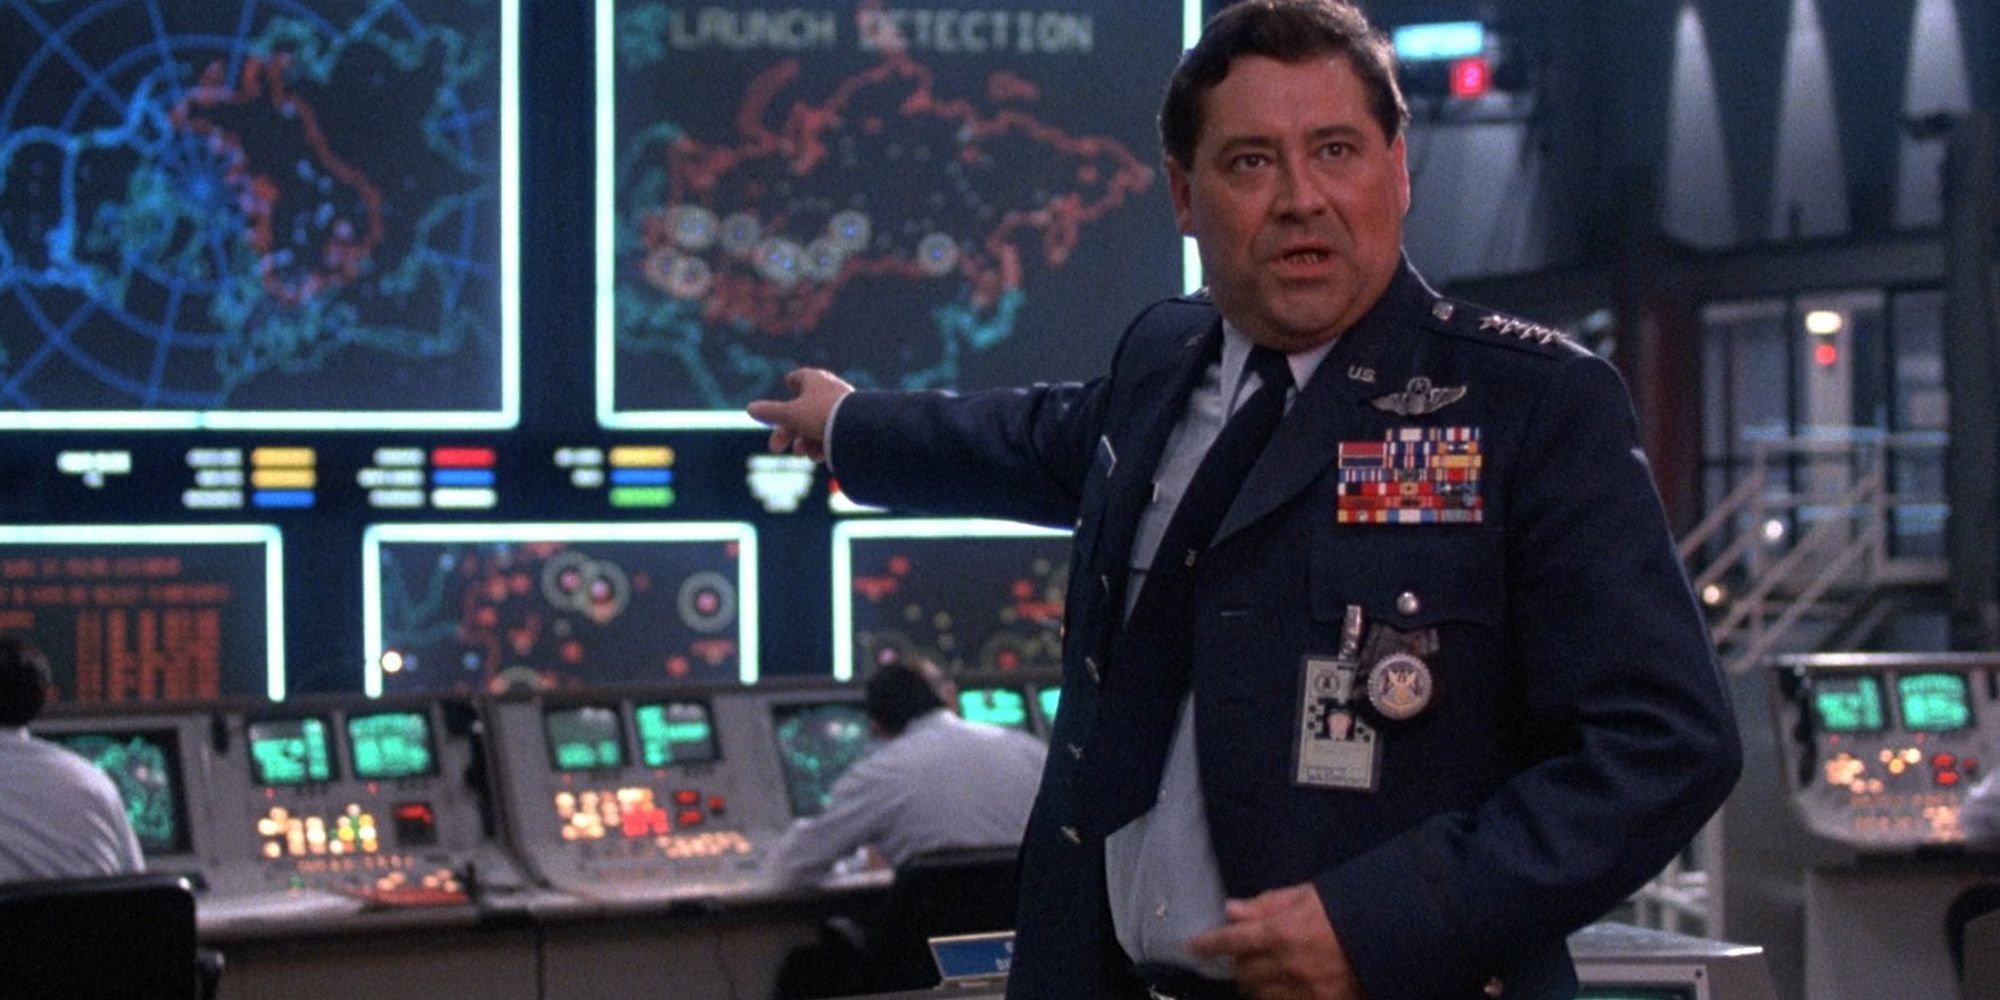 A military official points at several monitors while looking towards the camera in WarGames